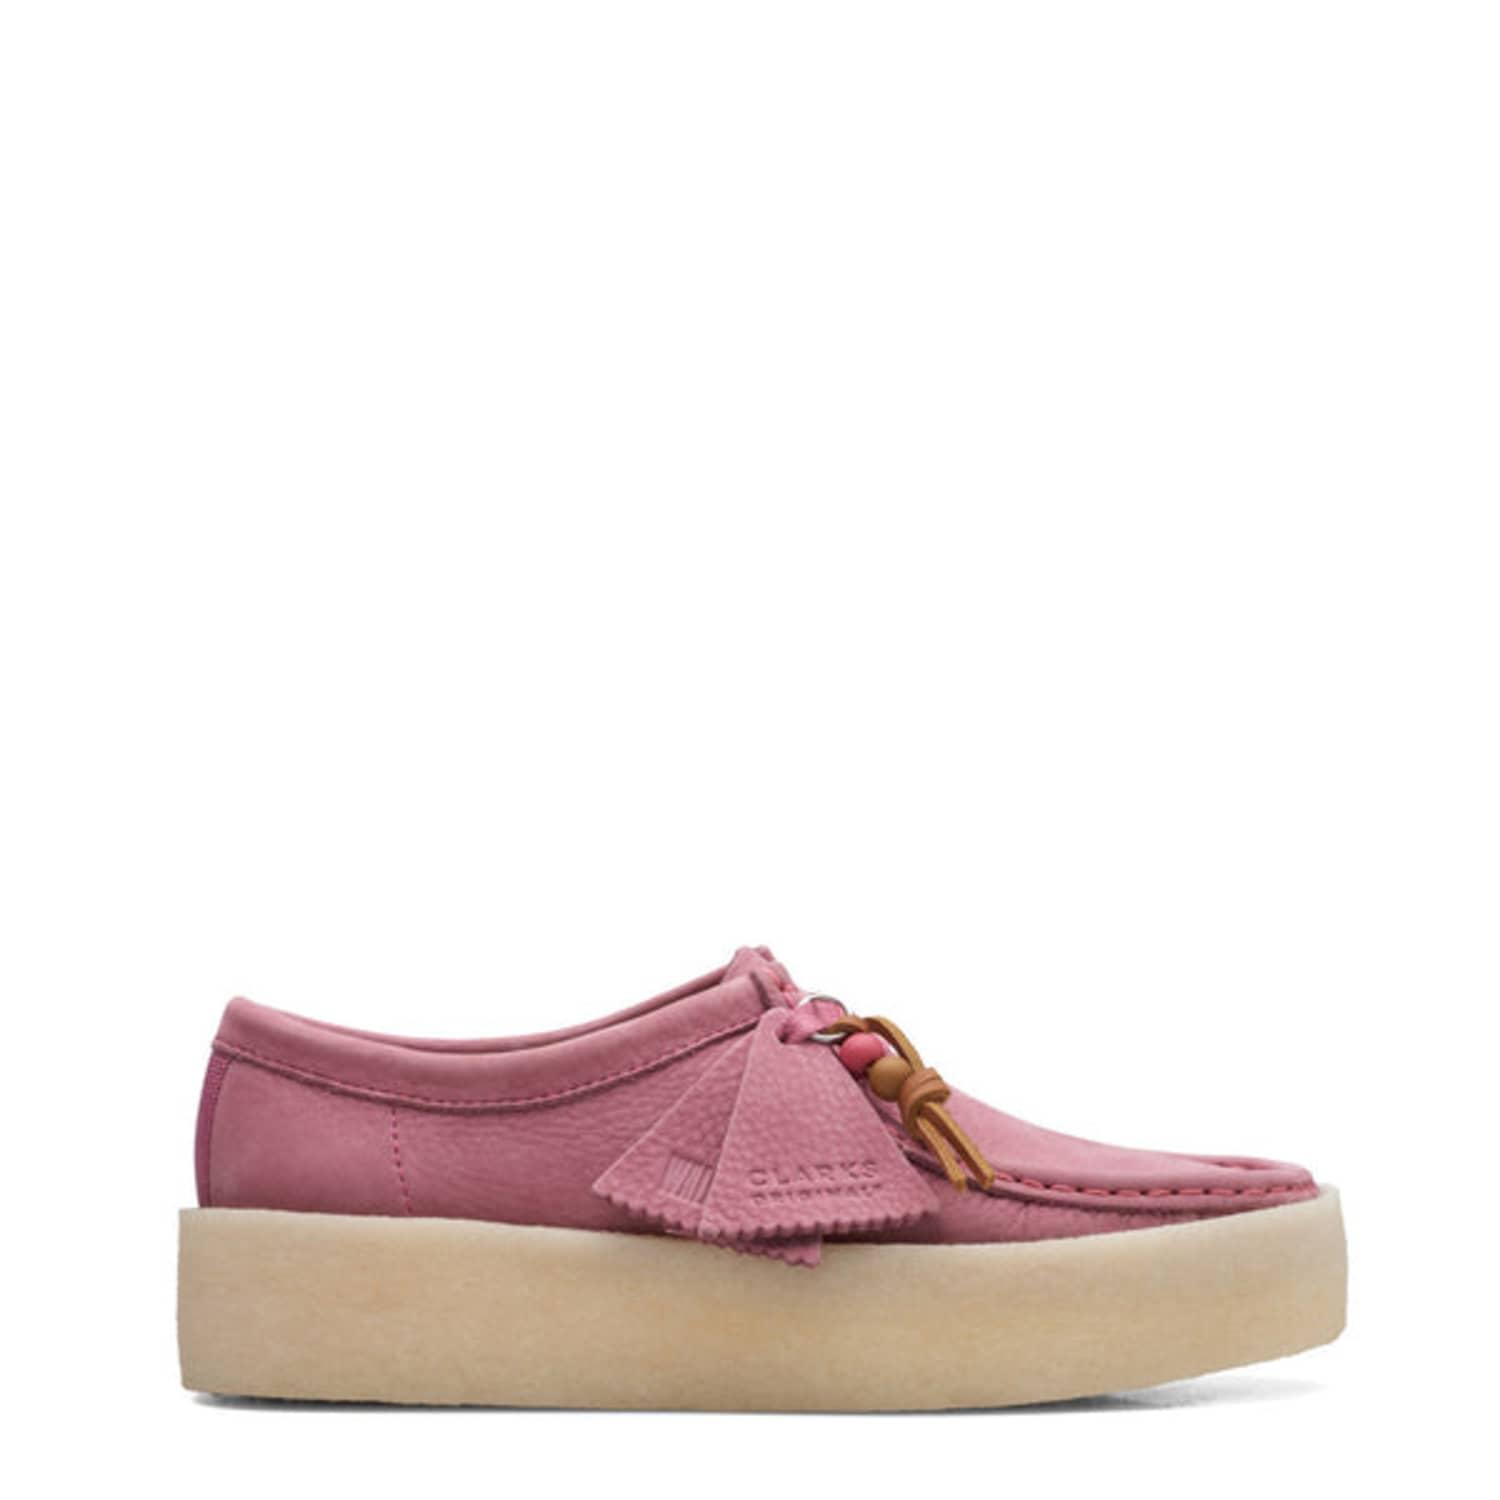 Clarks S Wallabee Cup Shoes Nubuck in | Lyst